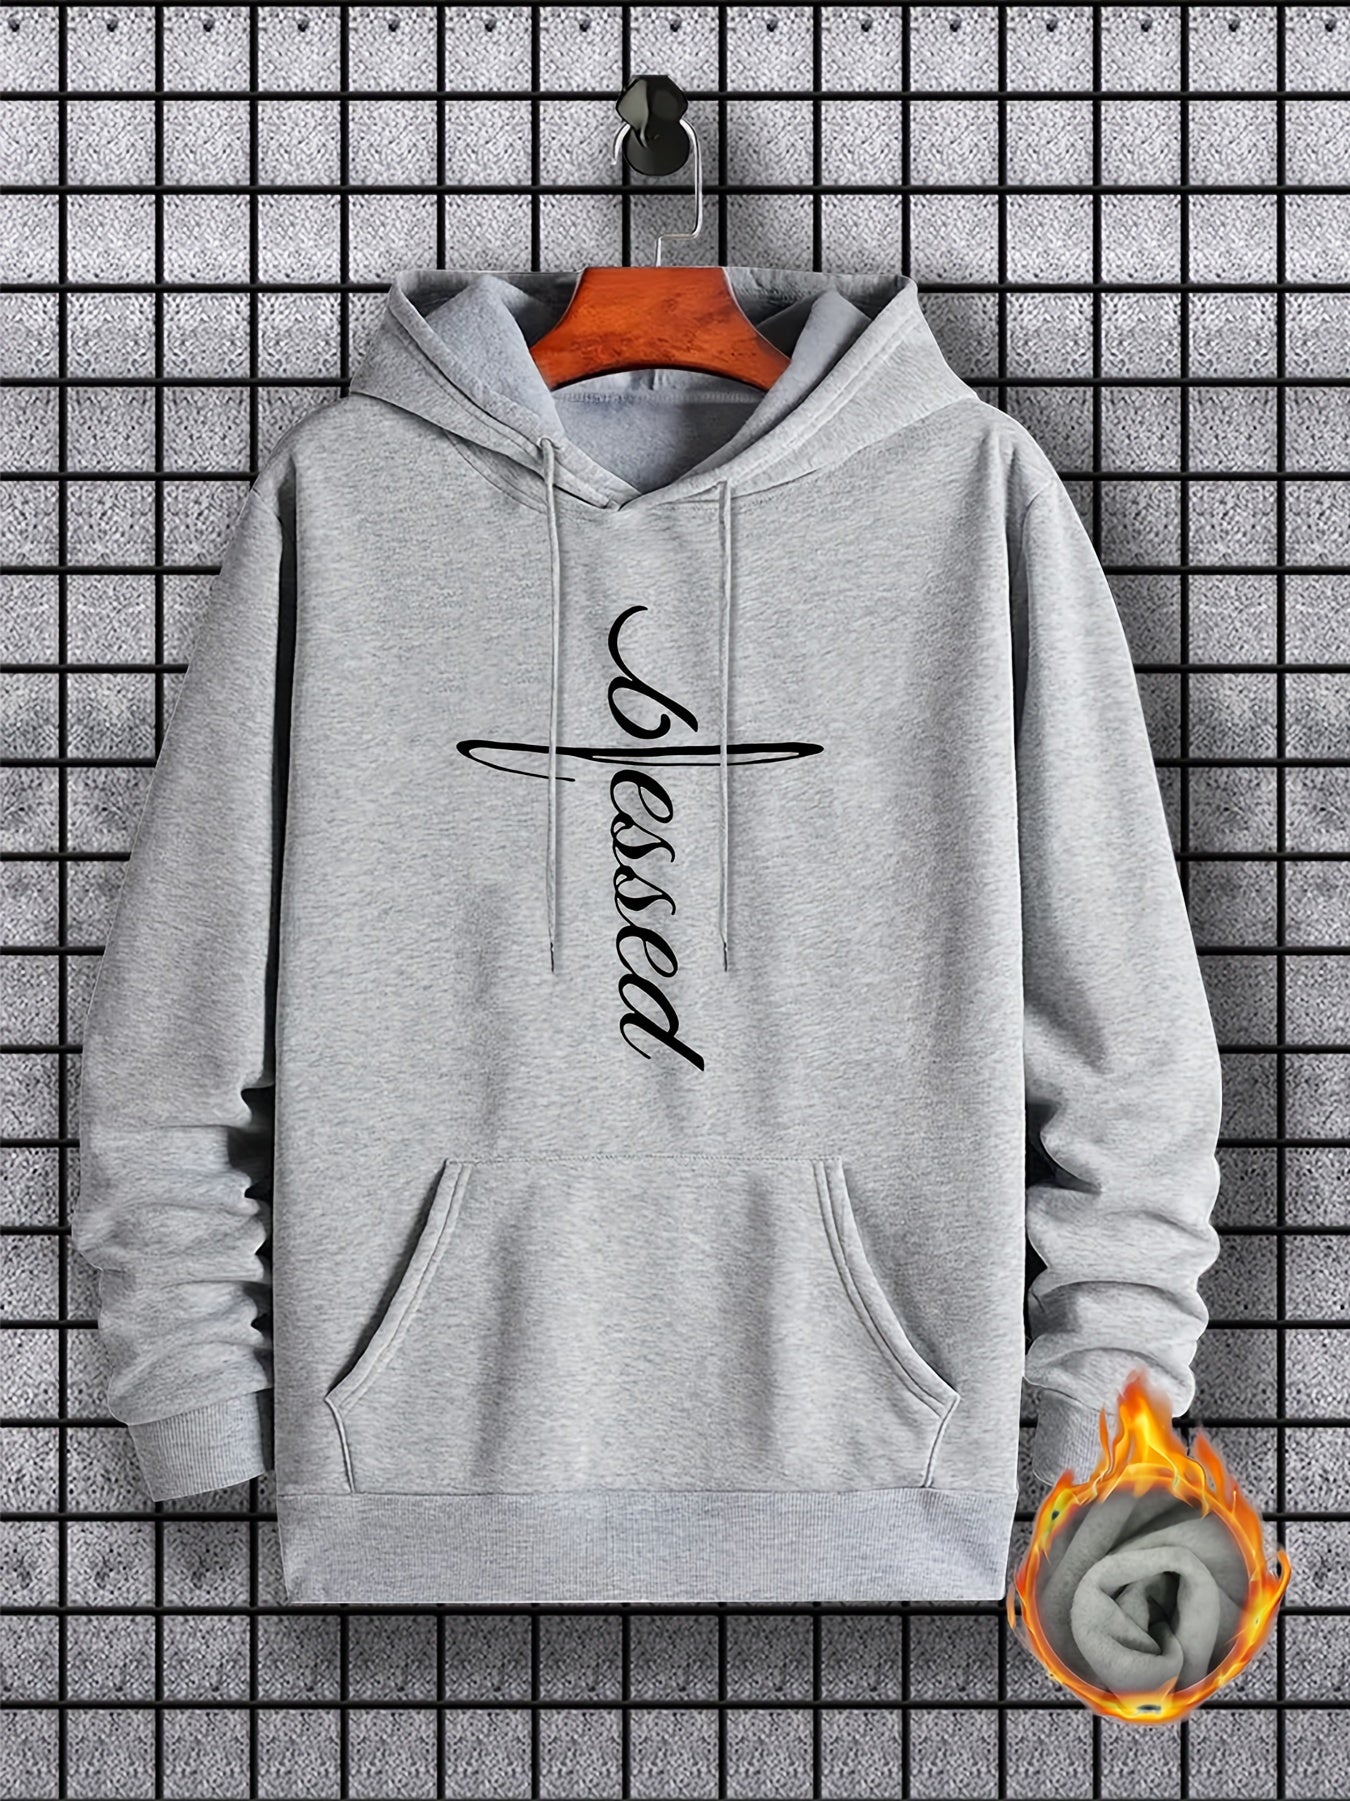 Blessed Print Hoodie, Cool Hoodies For Men, Men's Casual Graphic Design Pullover Hooded Sweatshirt With Kangaroo Pocket Streetwear For Winter Fall, As Gifts